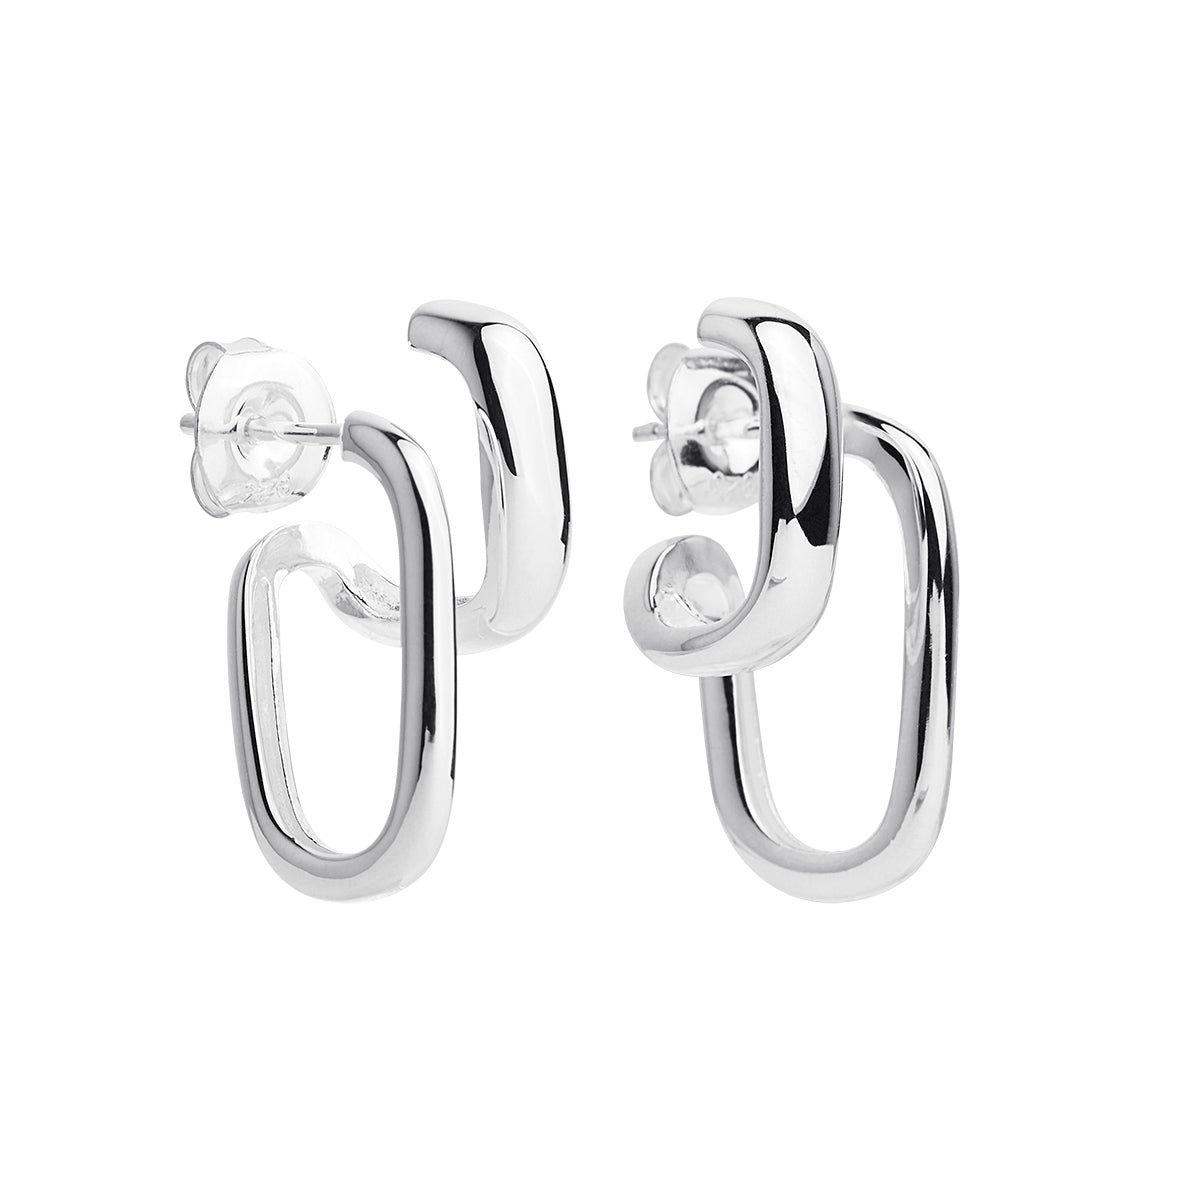 Sterilng silver, double hoop illusion, stud earring